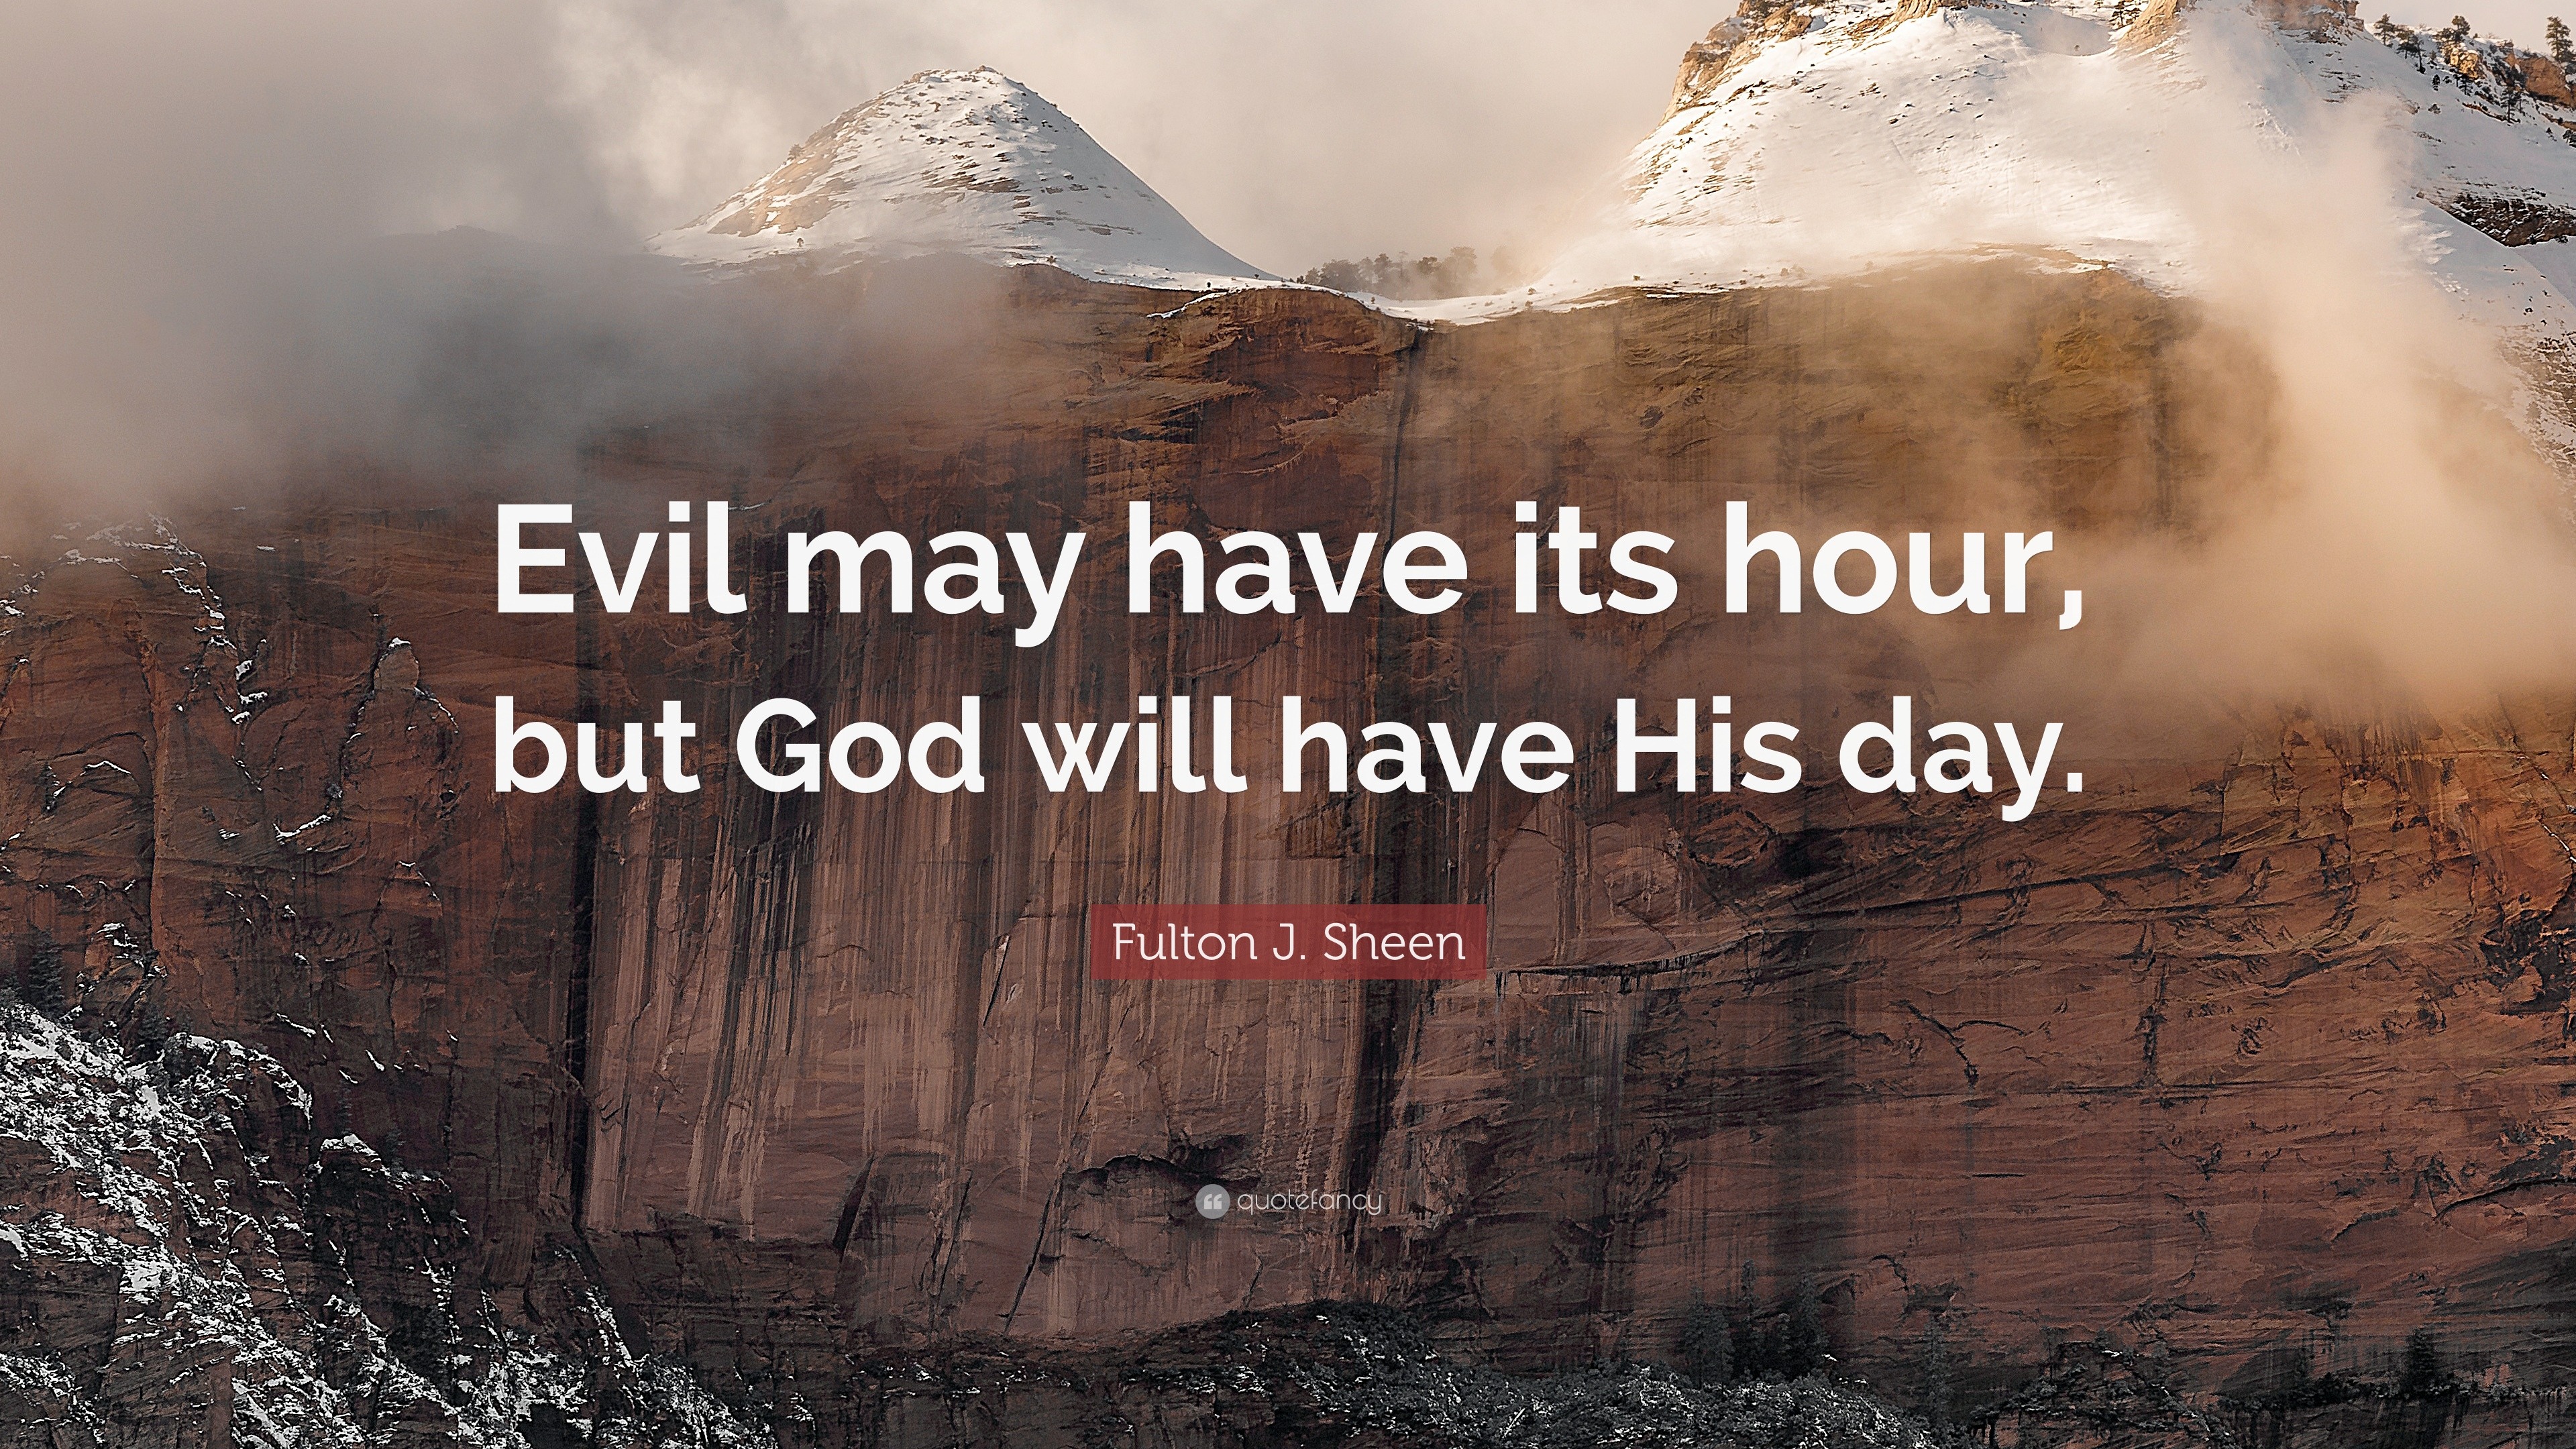 Fulton J. Sheen Quote: “Evil may have its hour, but God will have His